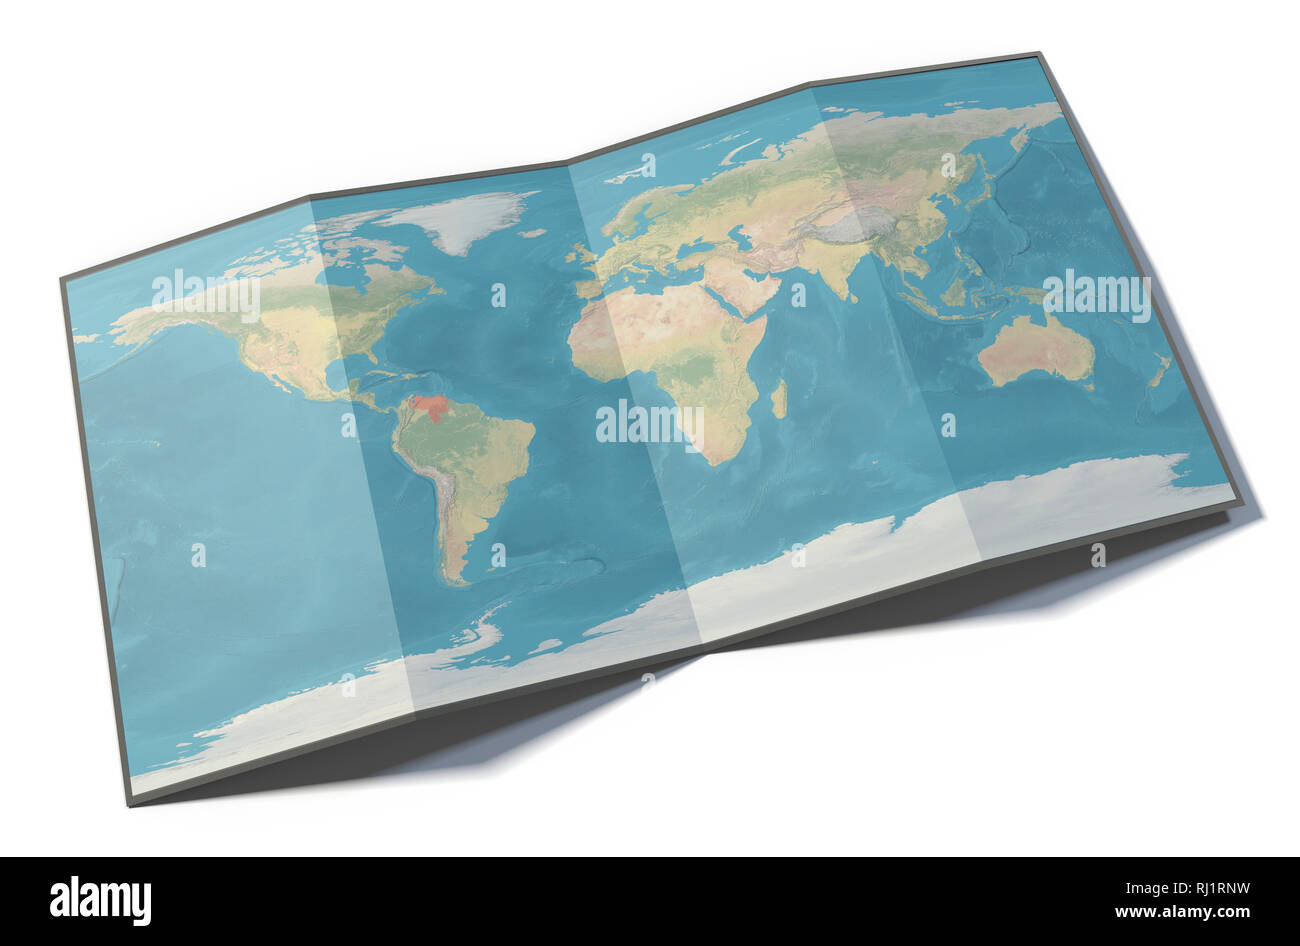 World map, Venezuela, drawn on a folded sheet, planisphere leaning on a surface, 3d rendering. Physical map Stock Photo